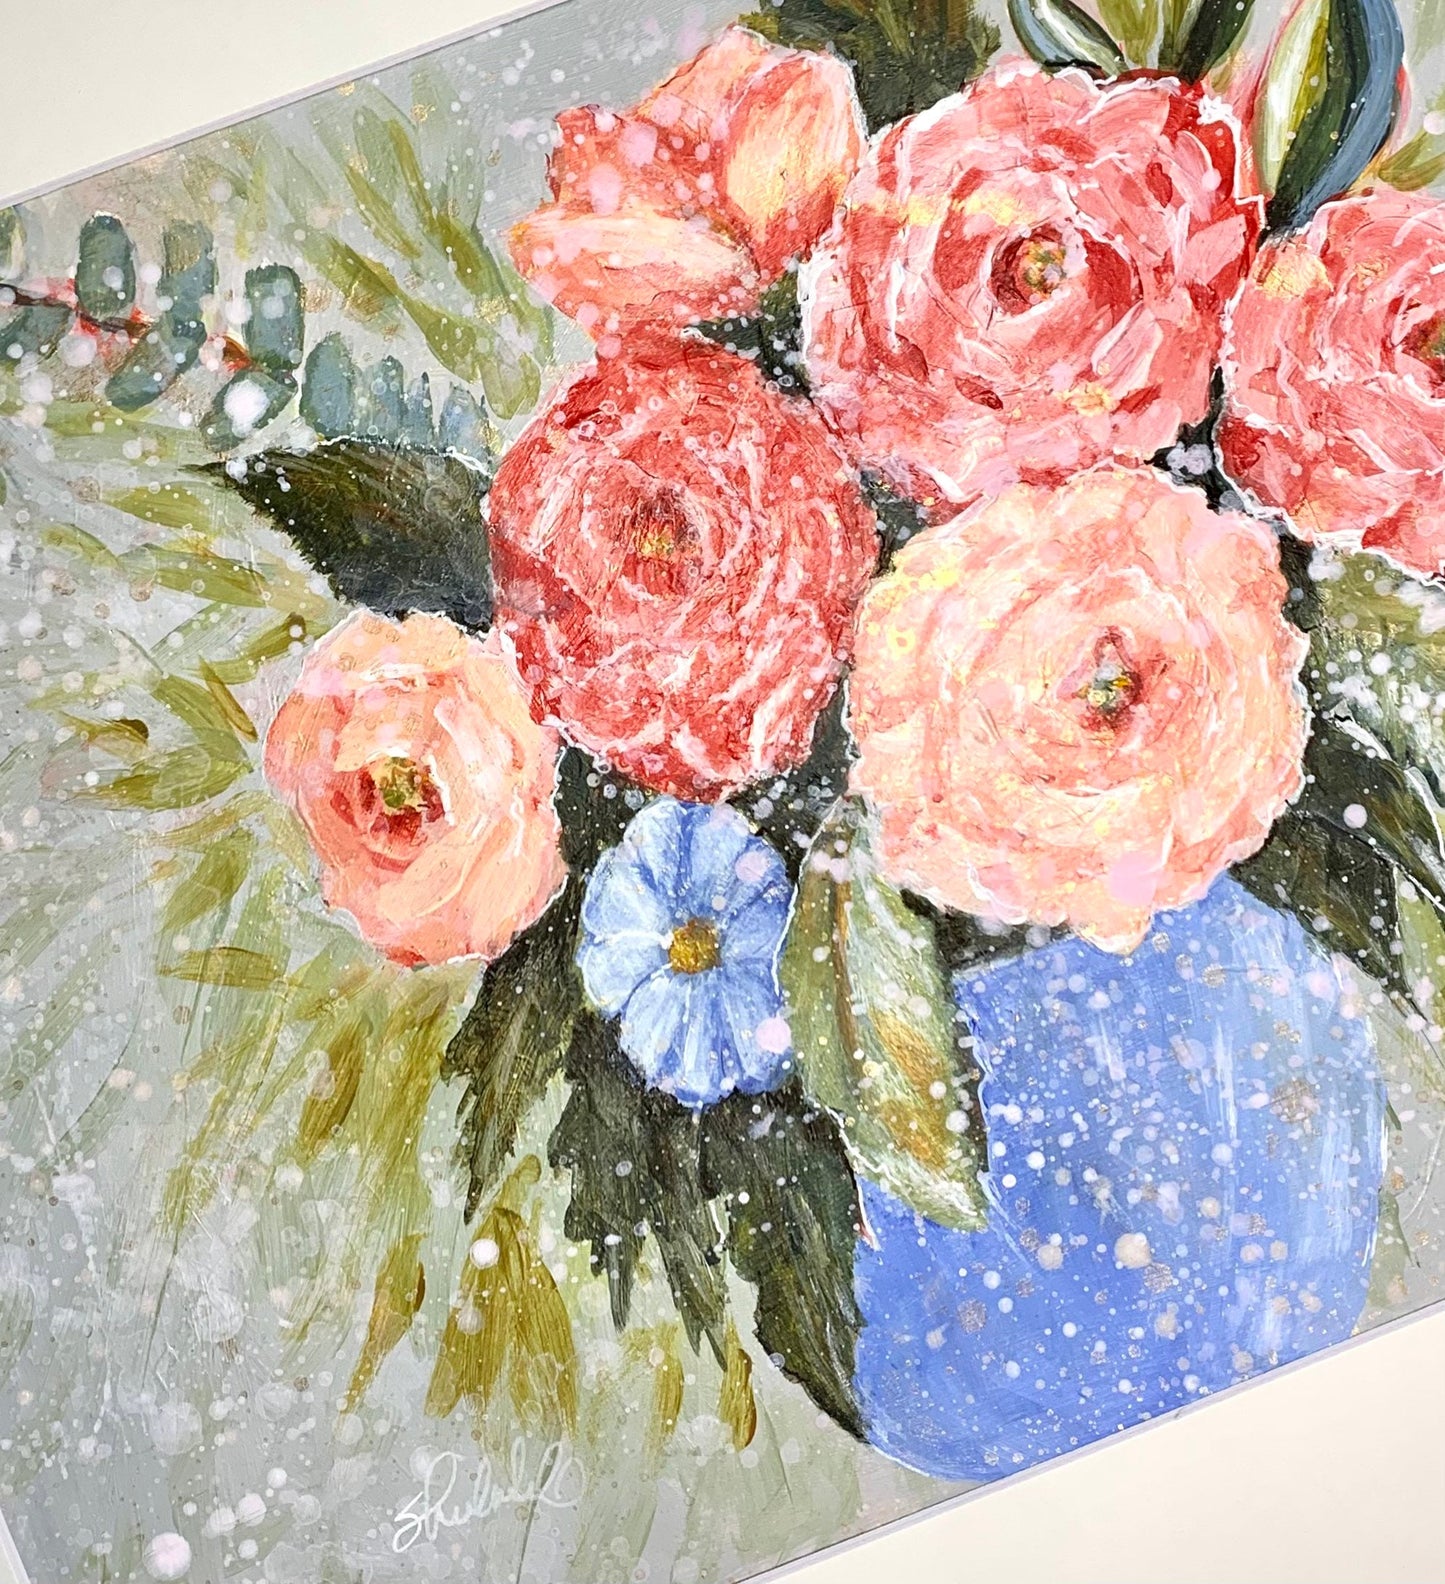 Roses in blue vase painting